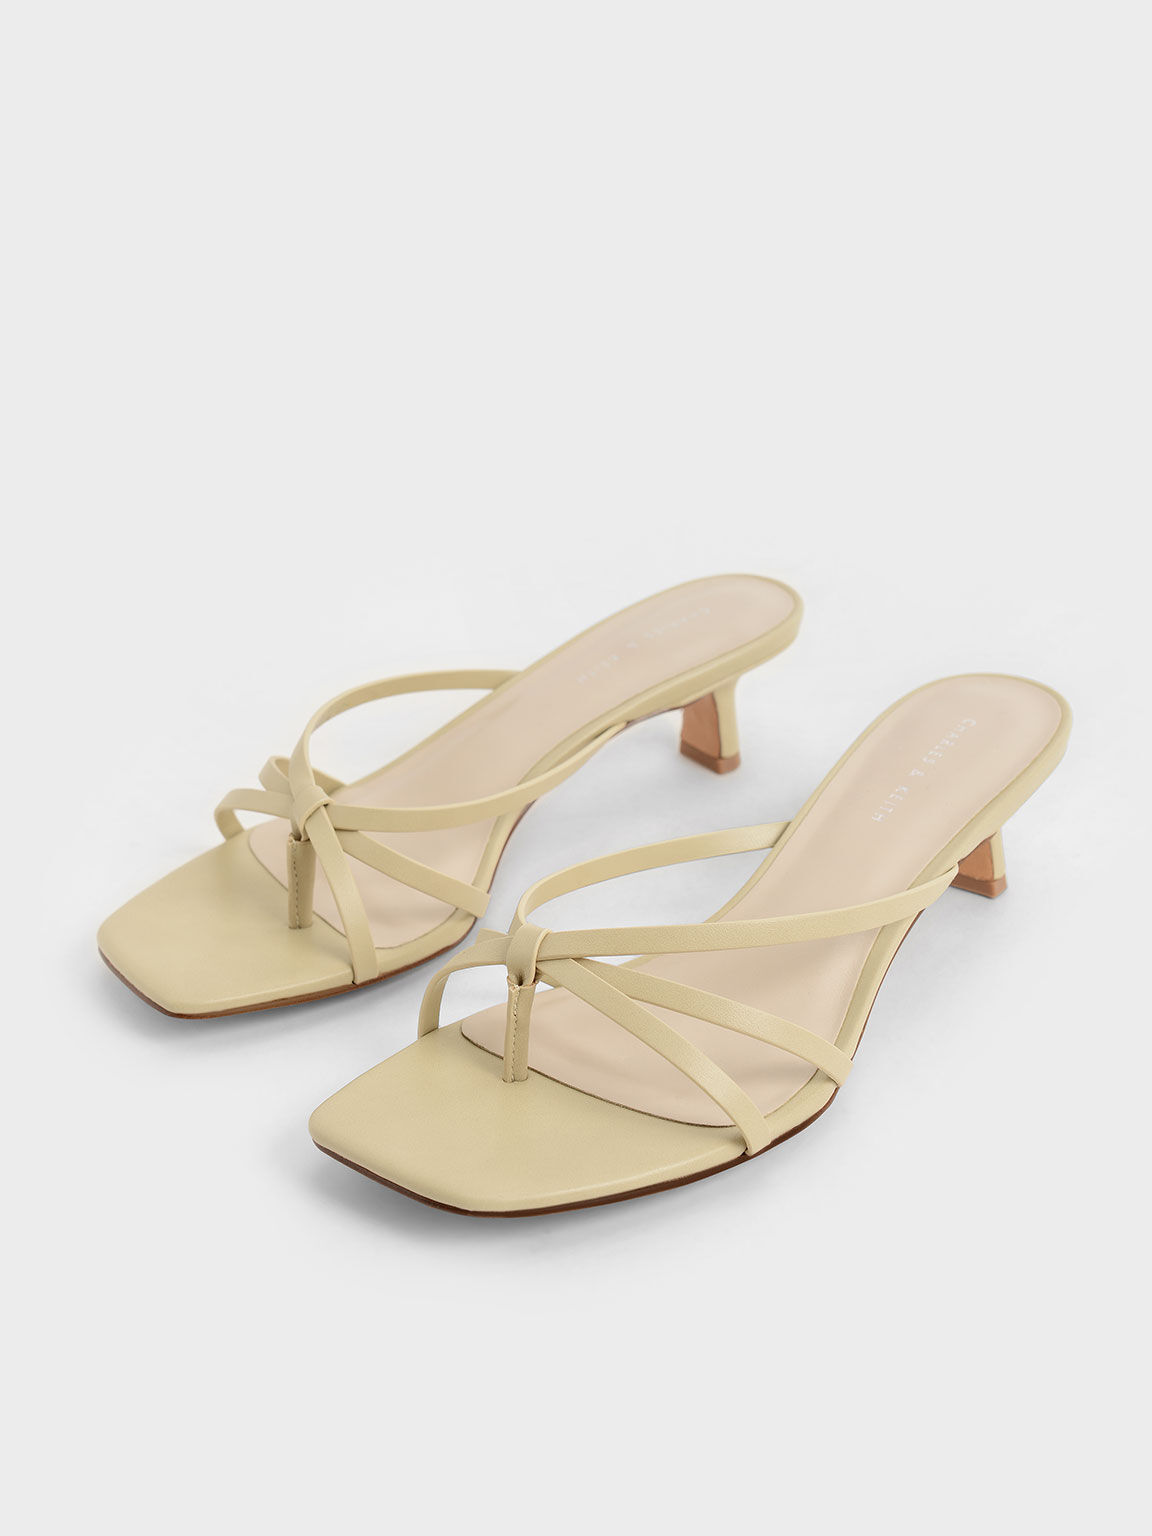 Sand Strappy Heeled Toe-Loop Sandals - CHARLES & KEITH ID